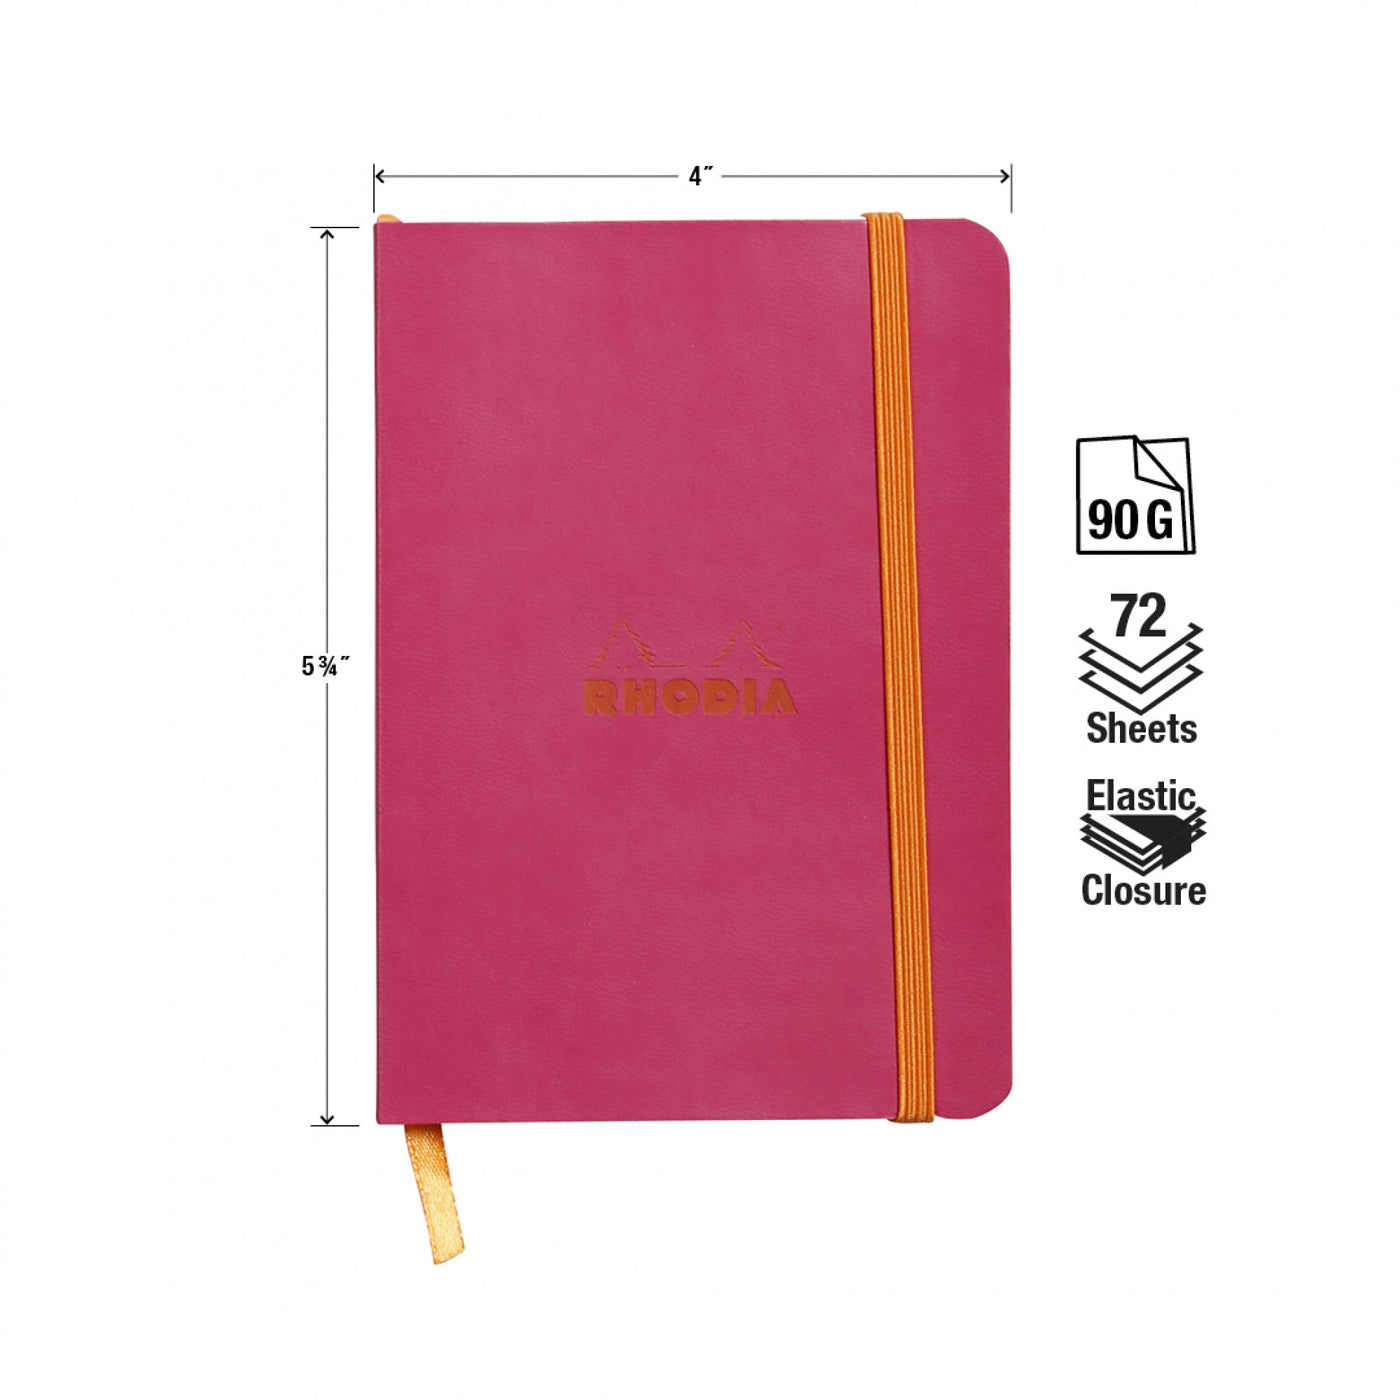 Rhodia Rhodiarama Soft Cover A6 Raspberry Lined Notebook Measurements